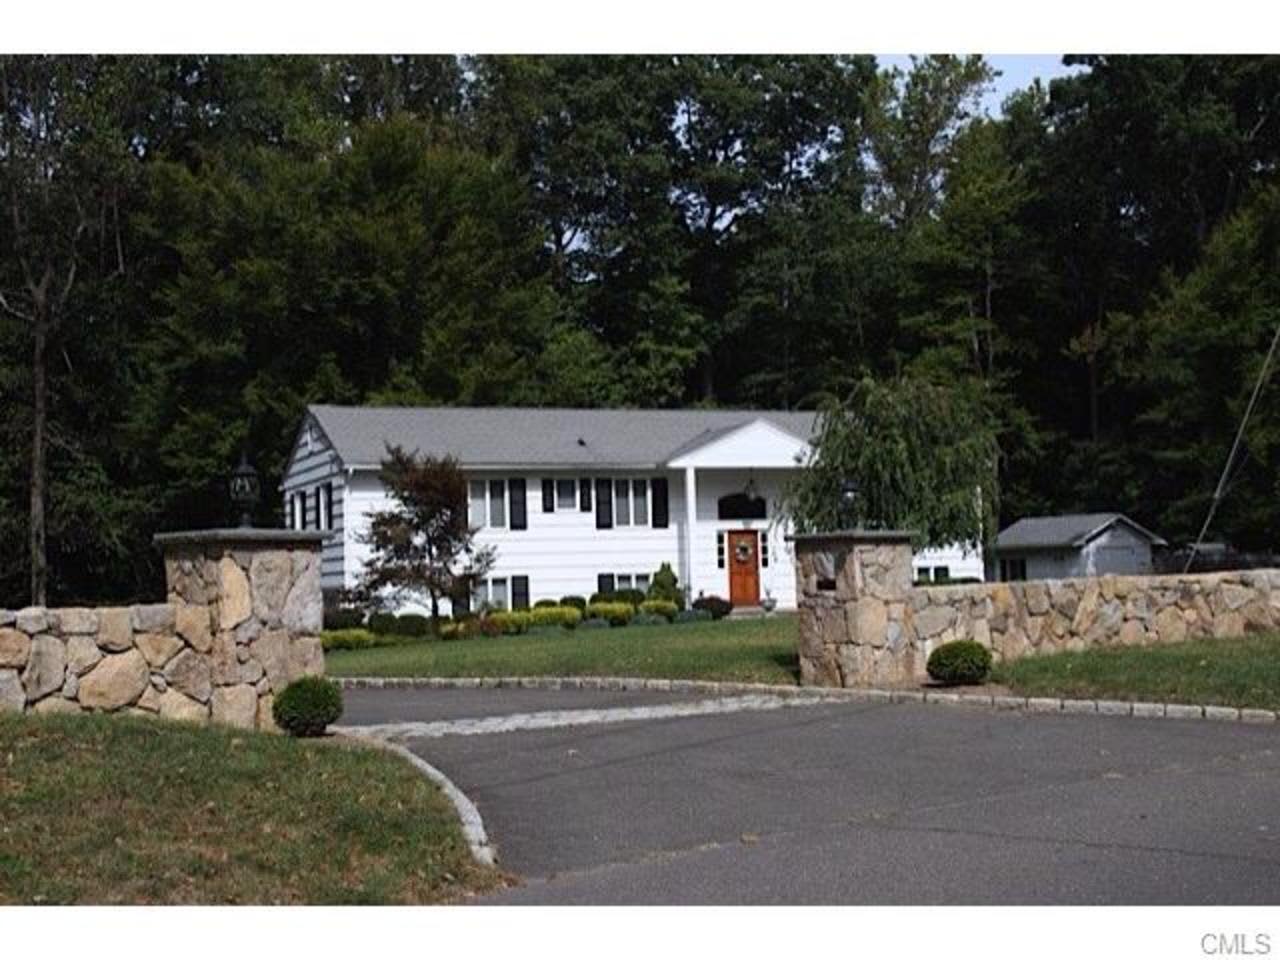 282 Cheese Spring Road, Wilton, CT 06897